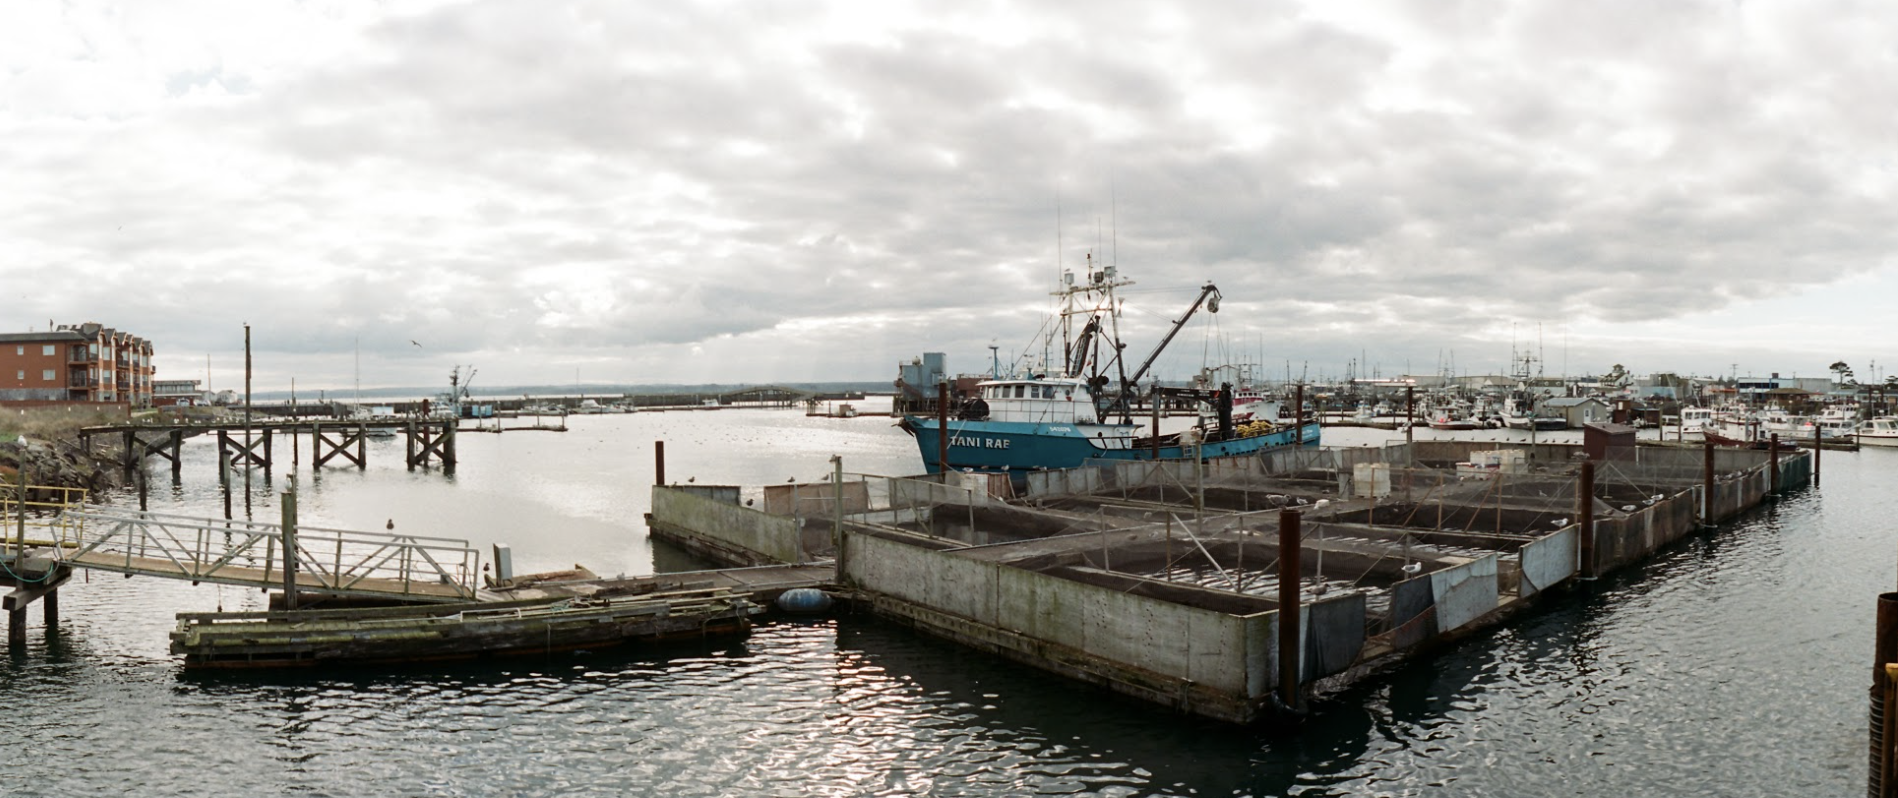 A picture of an AAFA north fishery fishing vessel in the harbour.